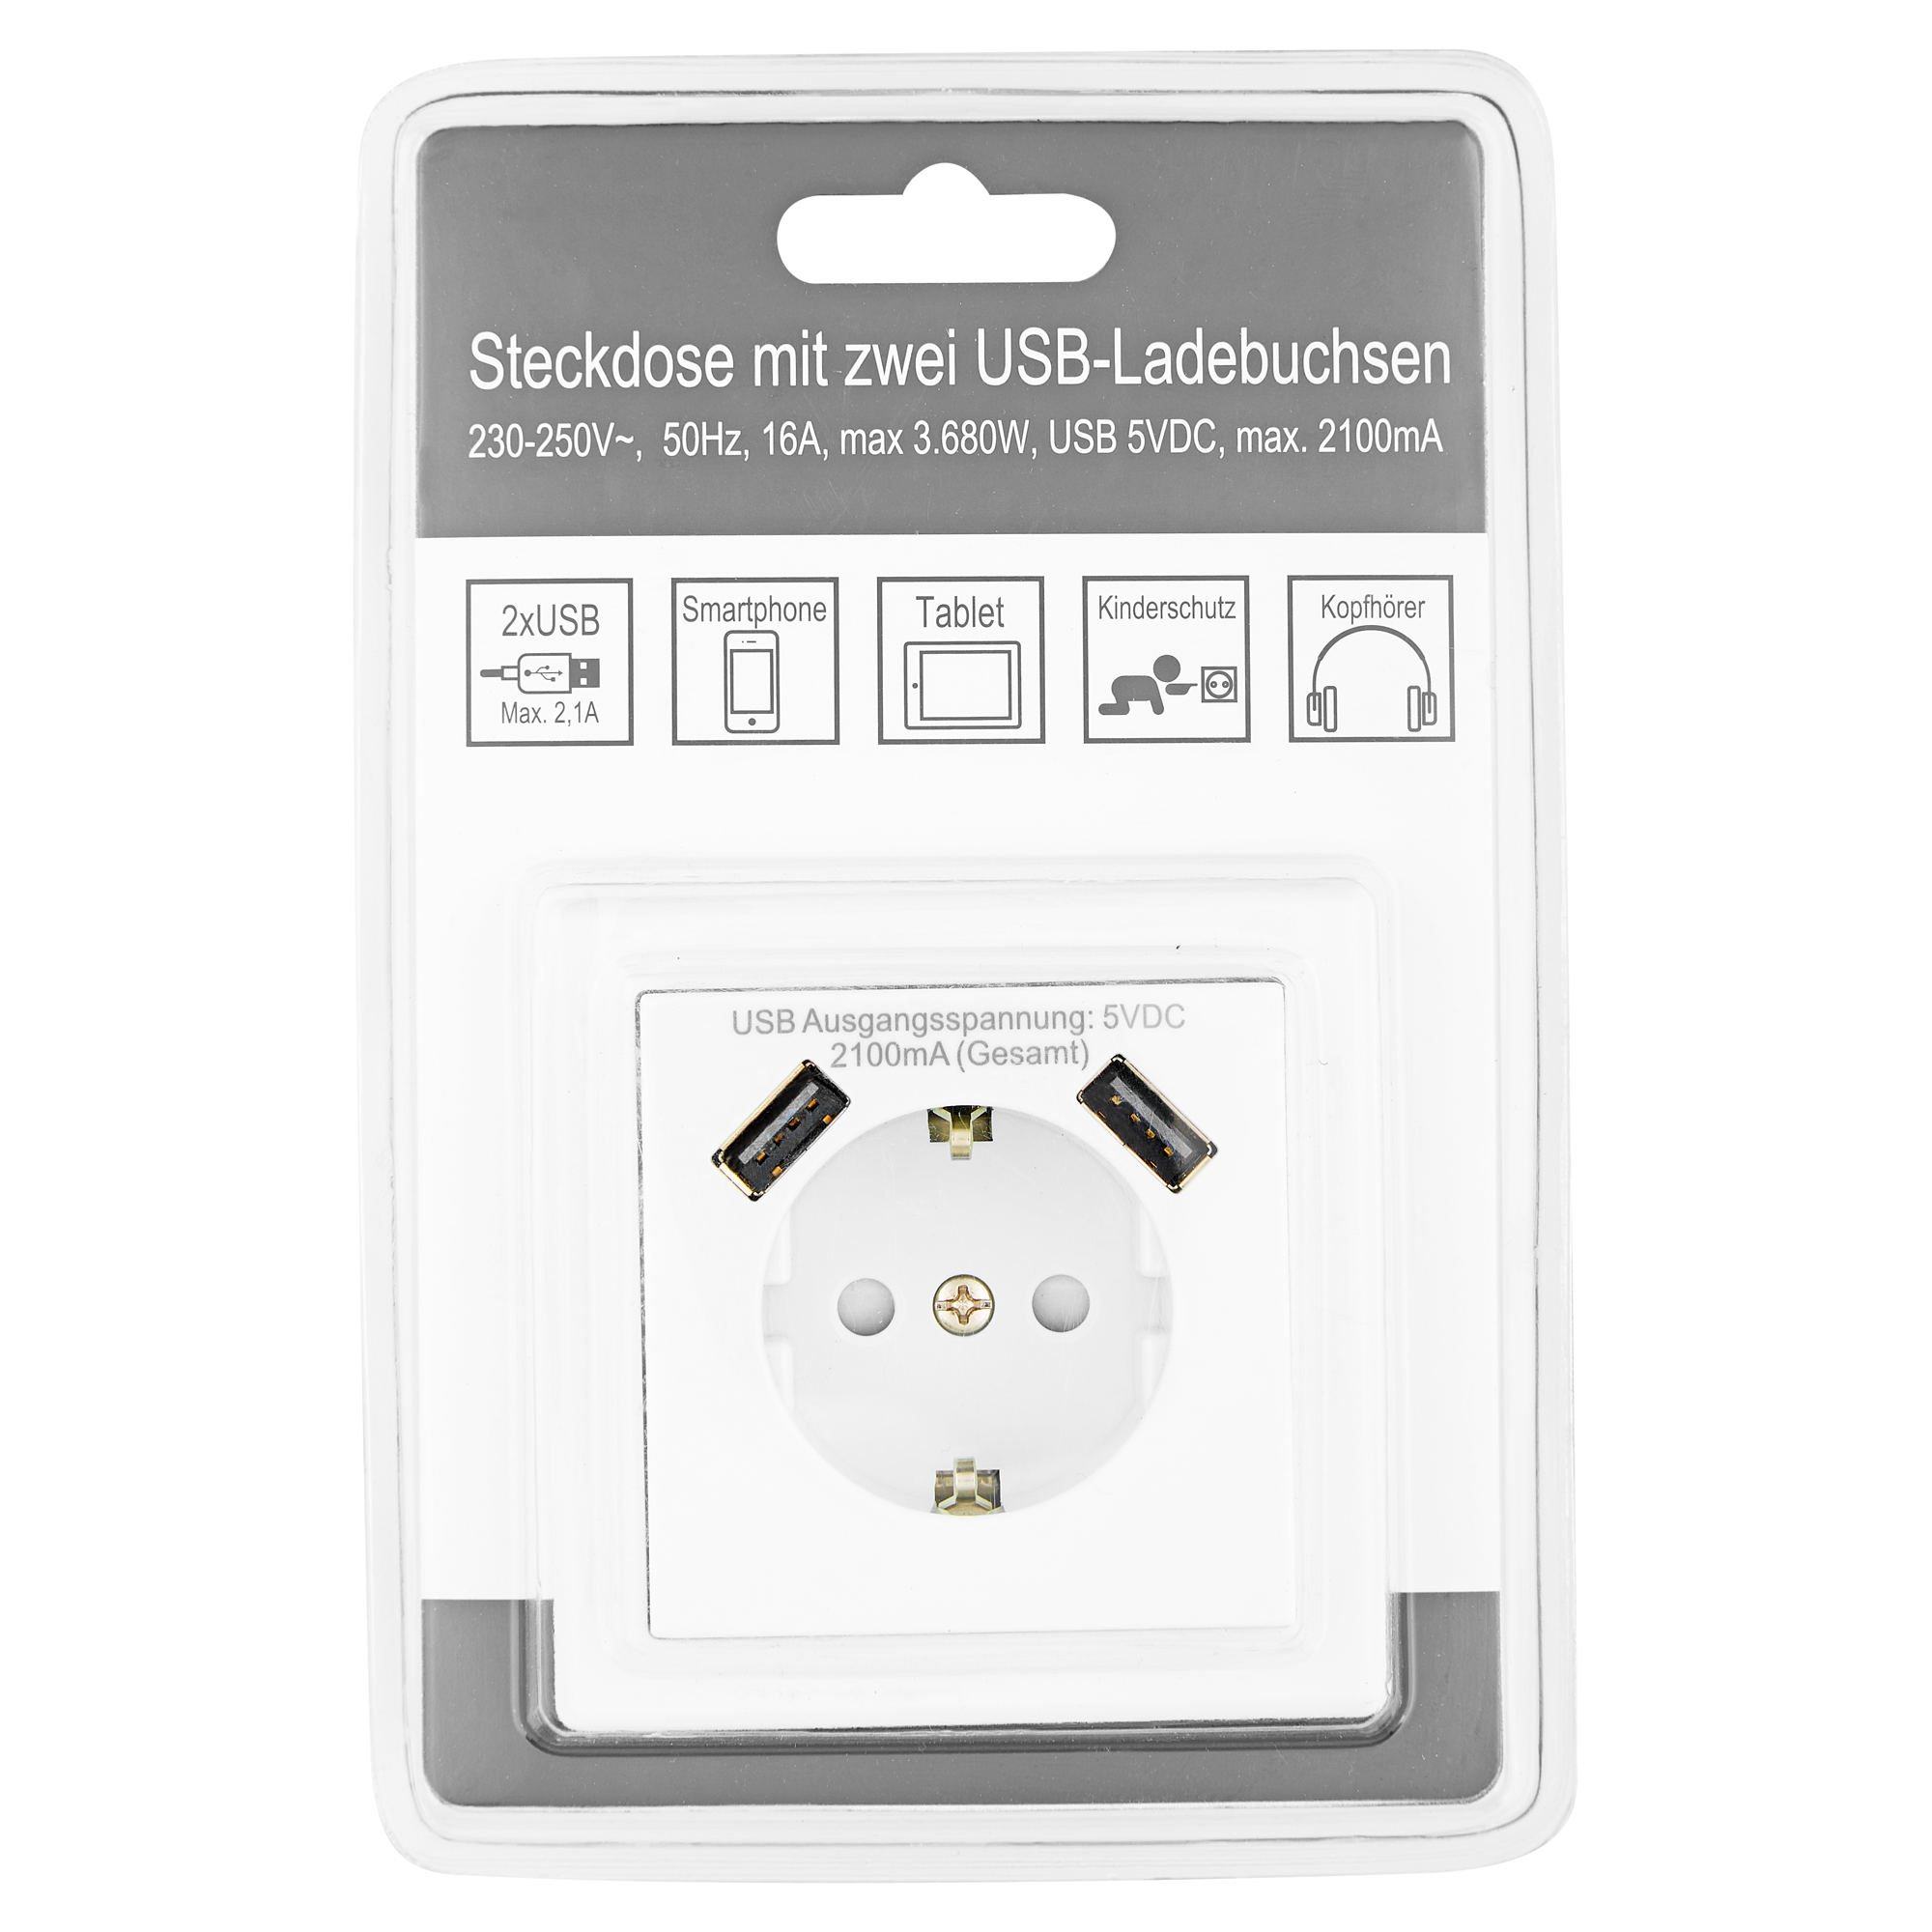 Steckdose 1-fach 2x USB weiß + product picture